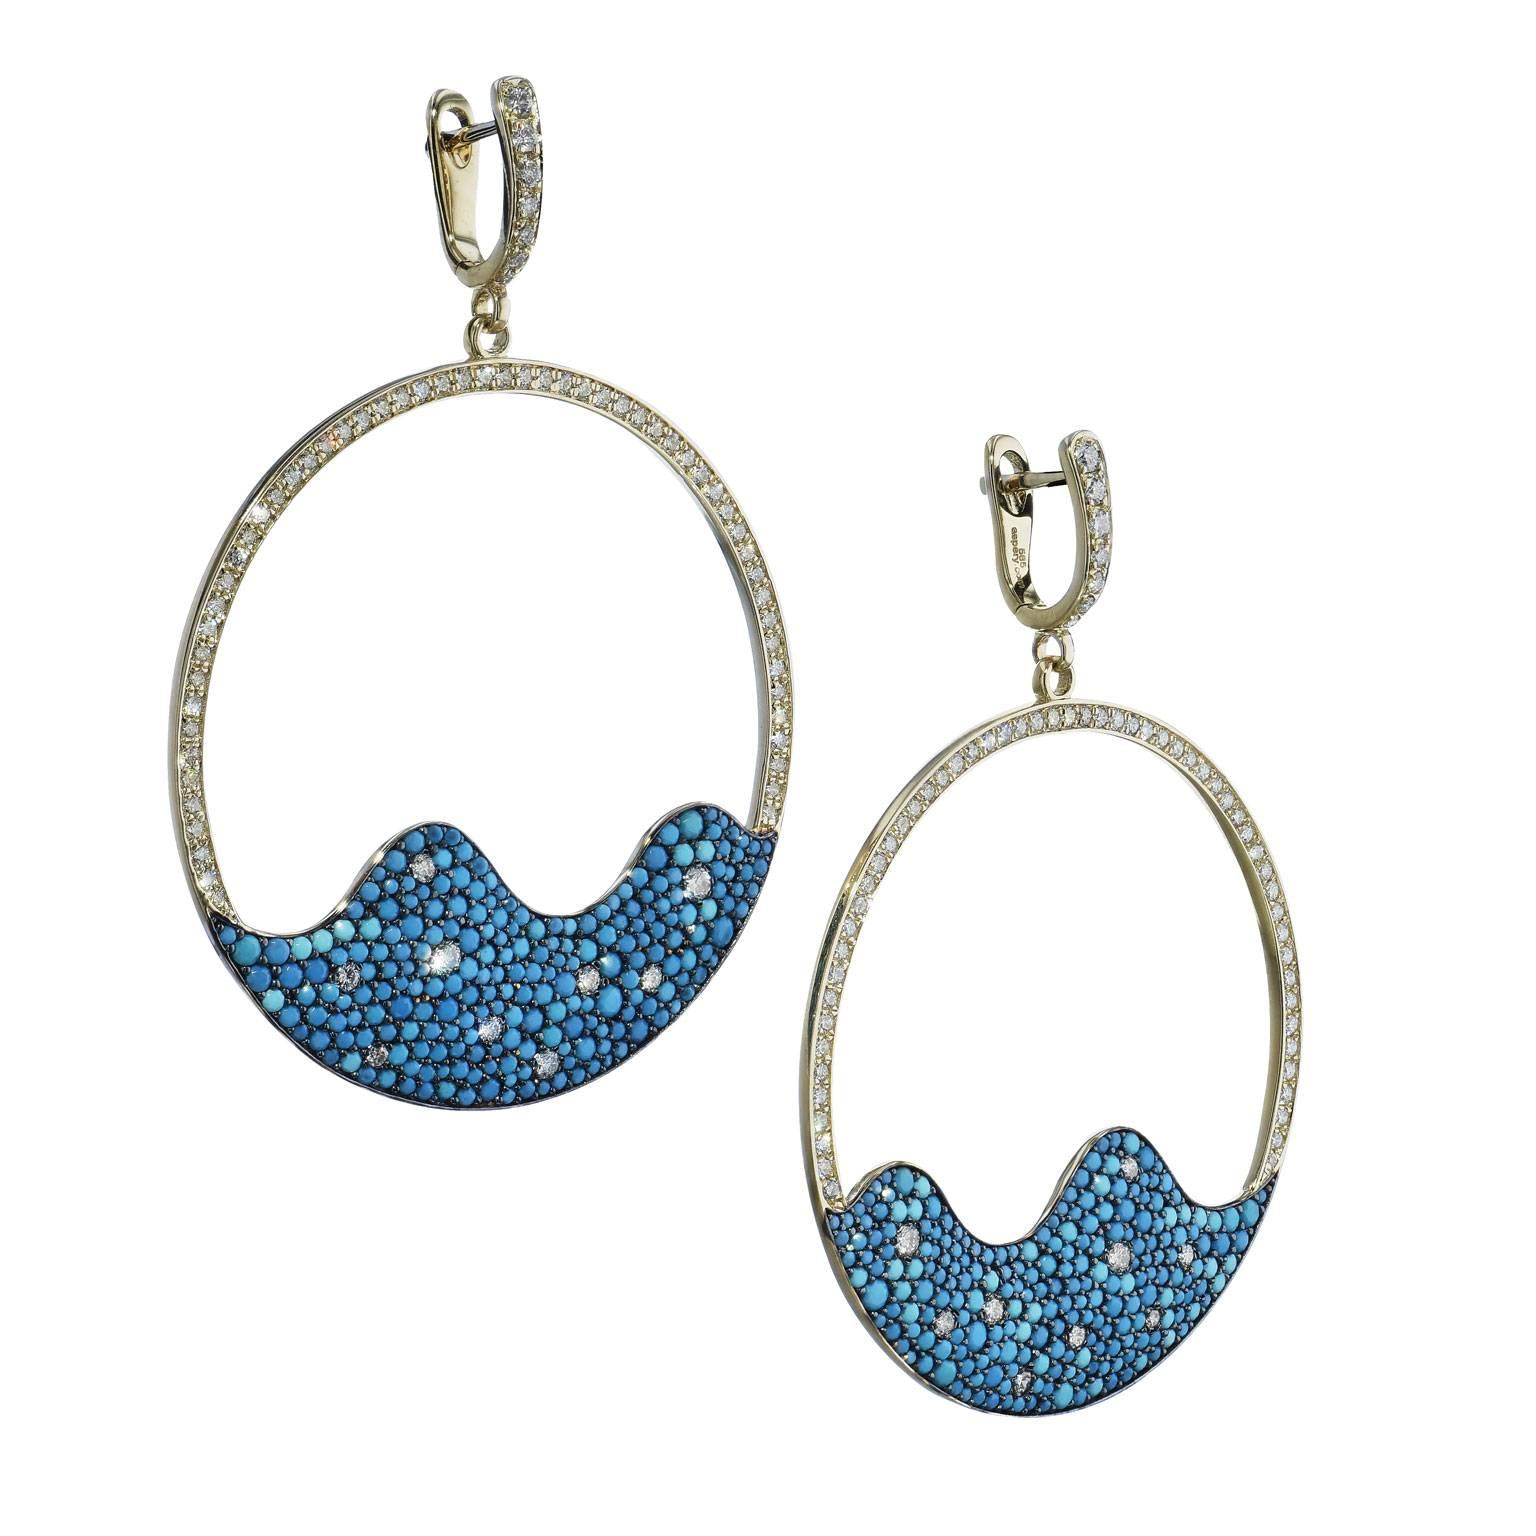 Get lost in a sea of pave-set crushed turquoise and diamonds in these 14 karat yellow gold hoop earrings. Featuring 2.26 carat of turquoise and pave diamonds adoring the hoop and bail, these earrings are a liquid dream. 